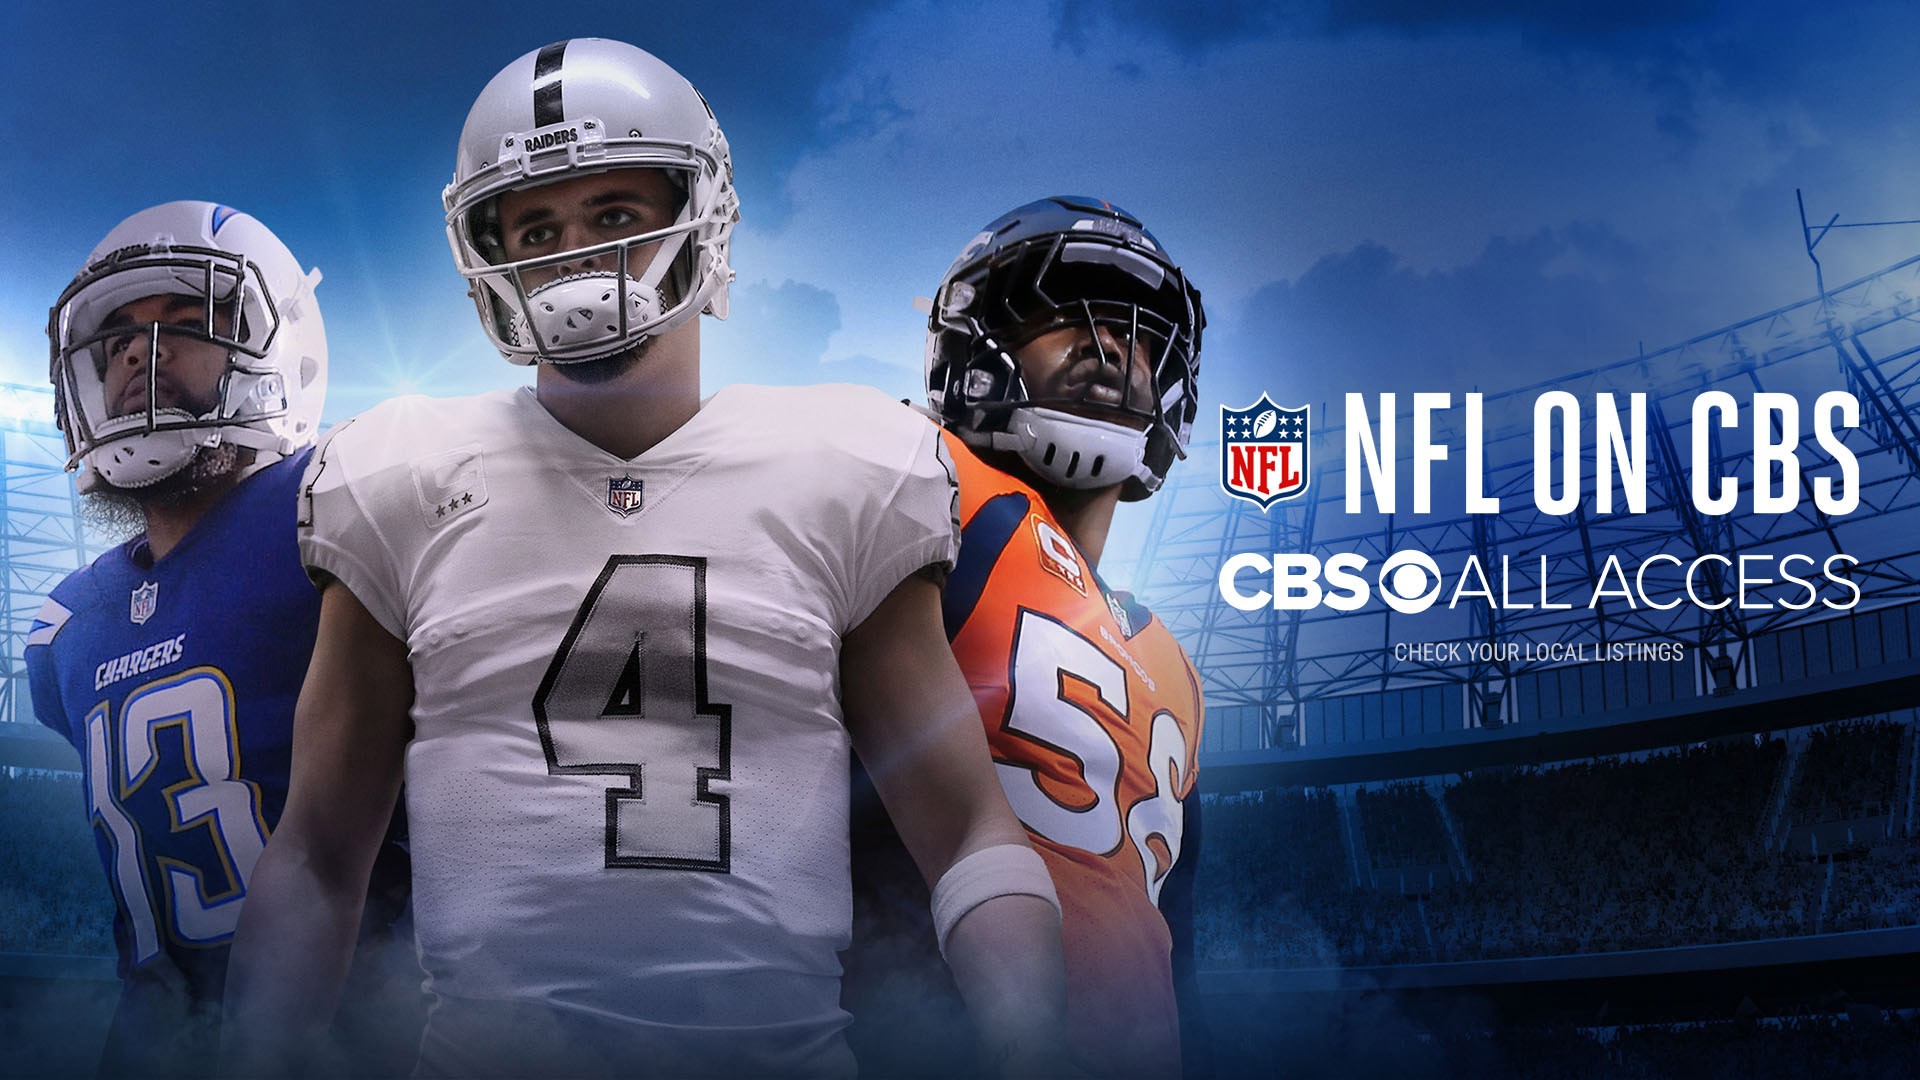 How To Watch Live NFL Games With CBS All Access